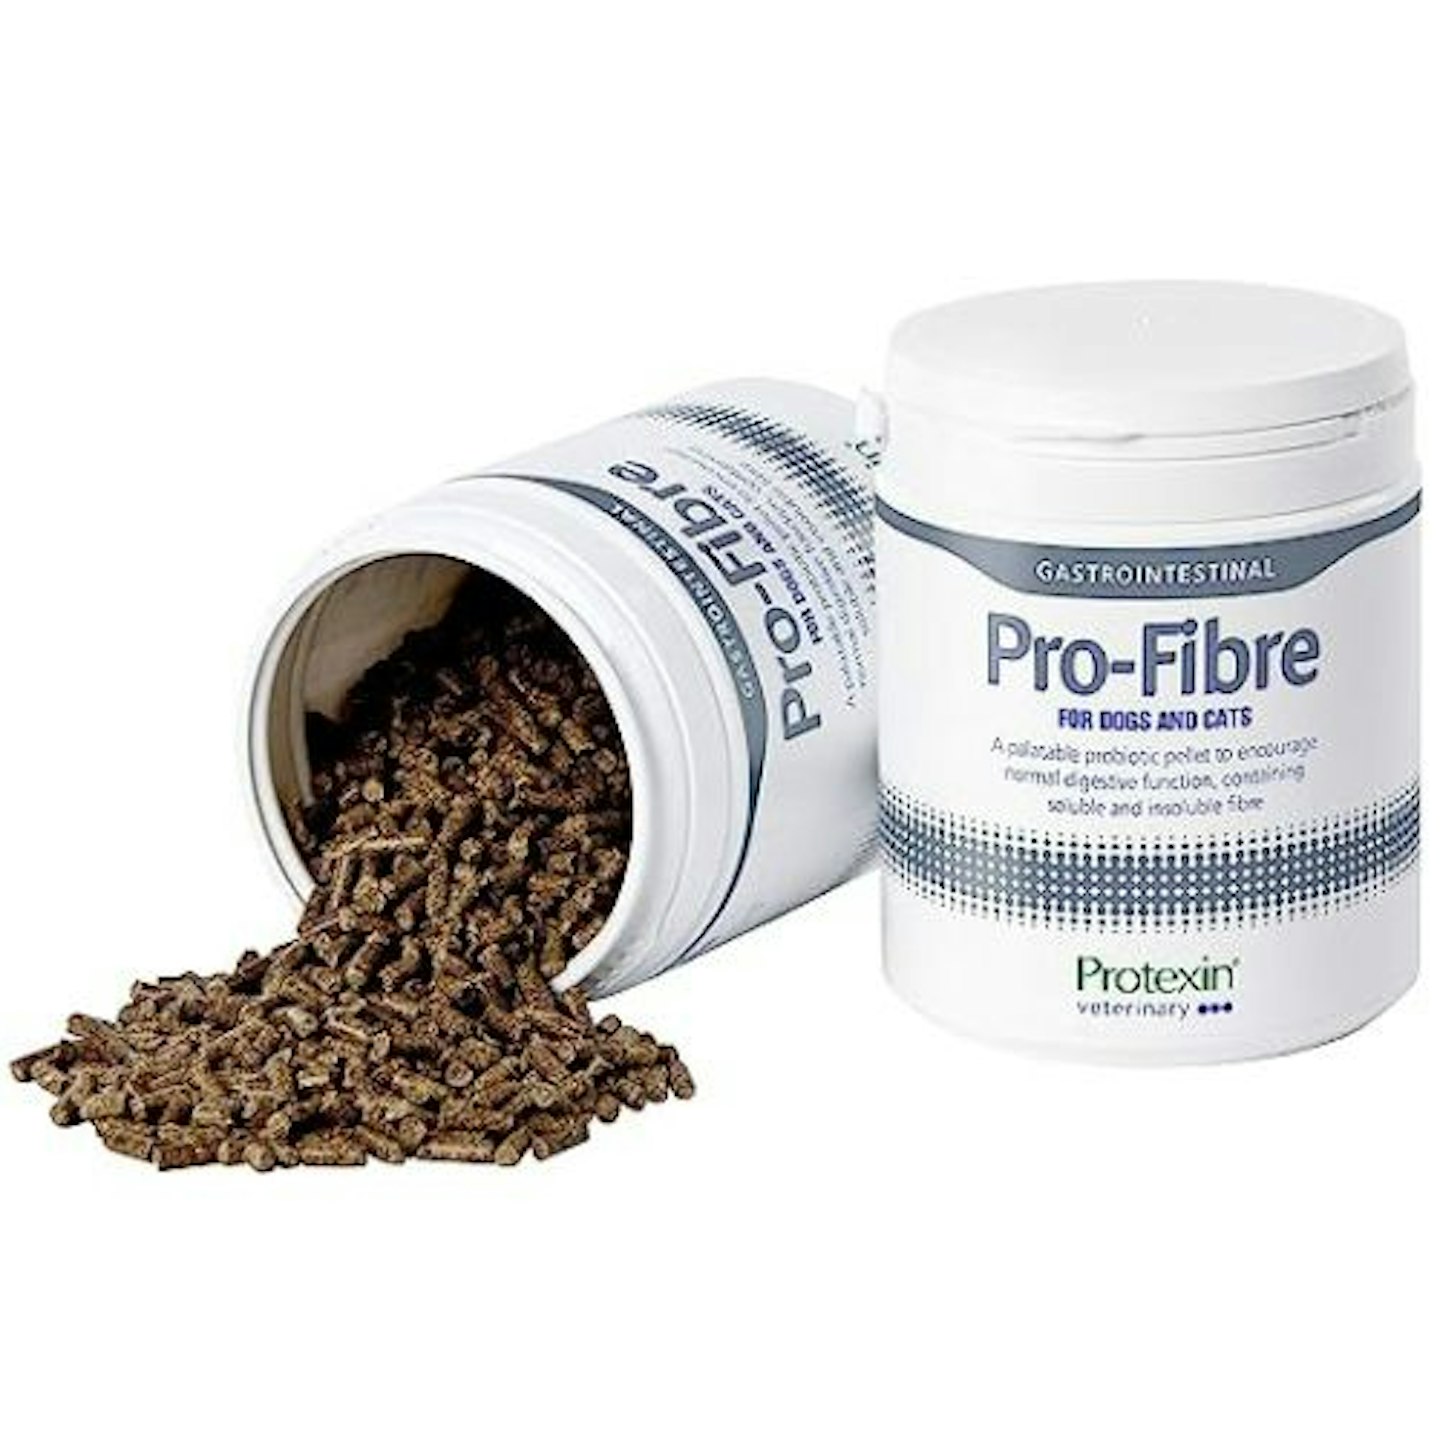 Protexin Veterinary Pro-Fibre for Dogs and Cats